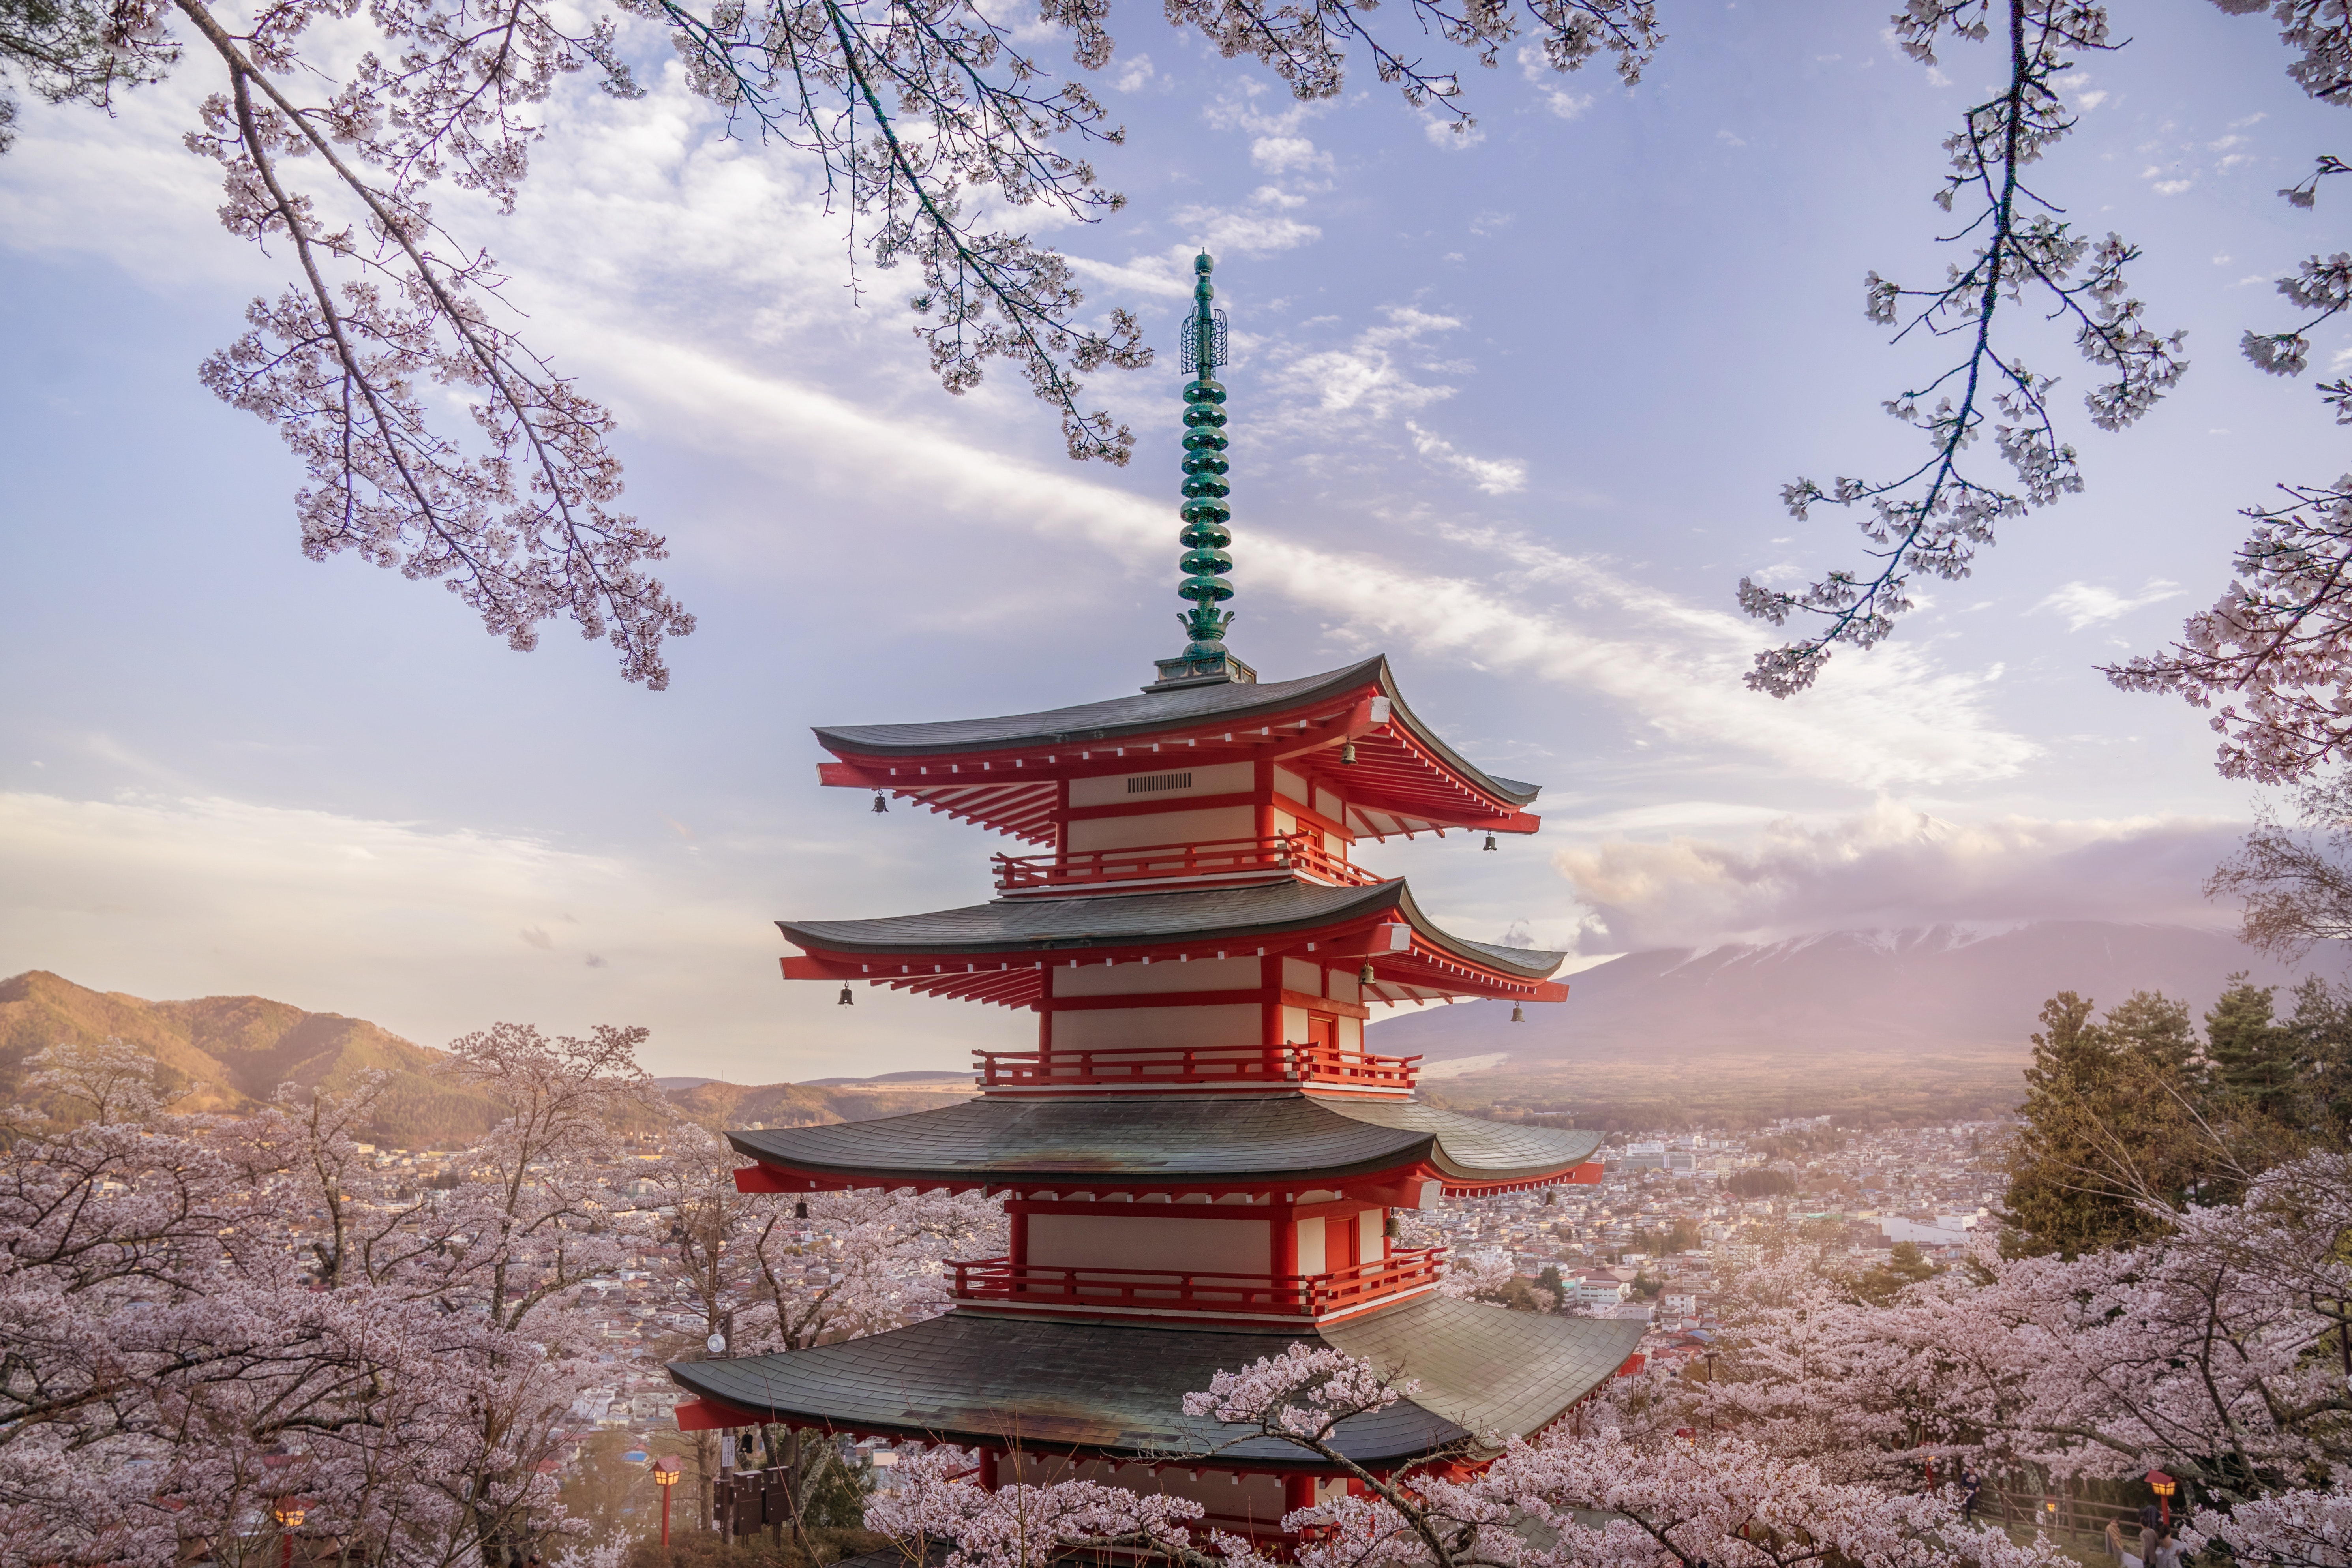 Japan Asia Photography Landscape Cherry Blossom Flowers Nature Mountains Clouds Mount Fuji Pagoda Ar 5958x3972